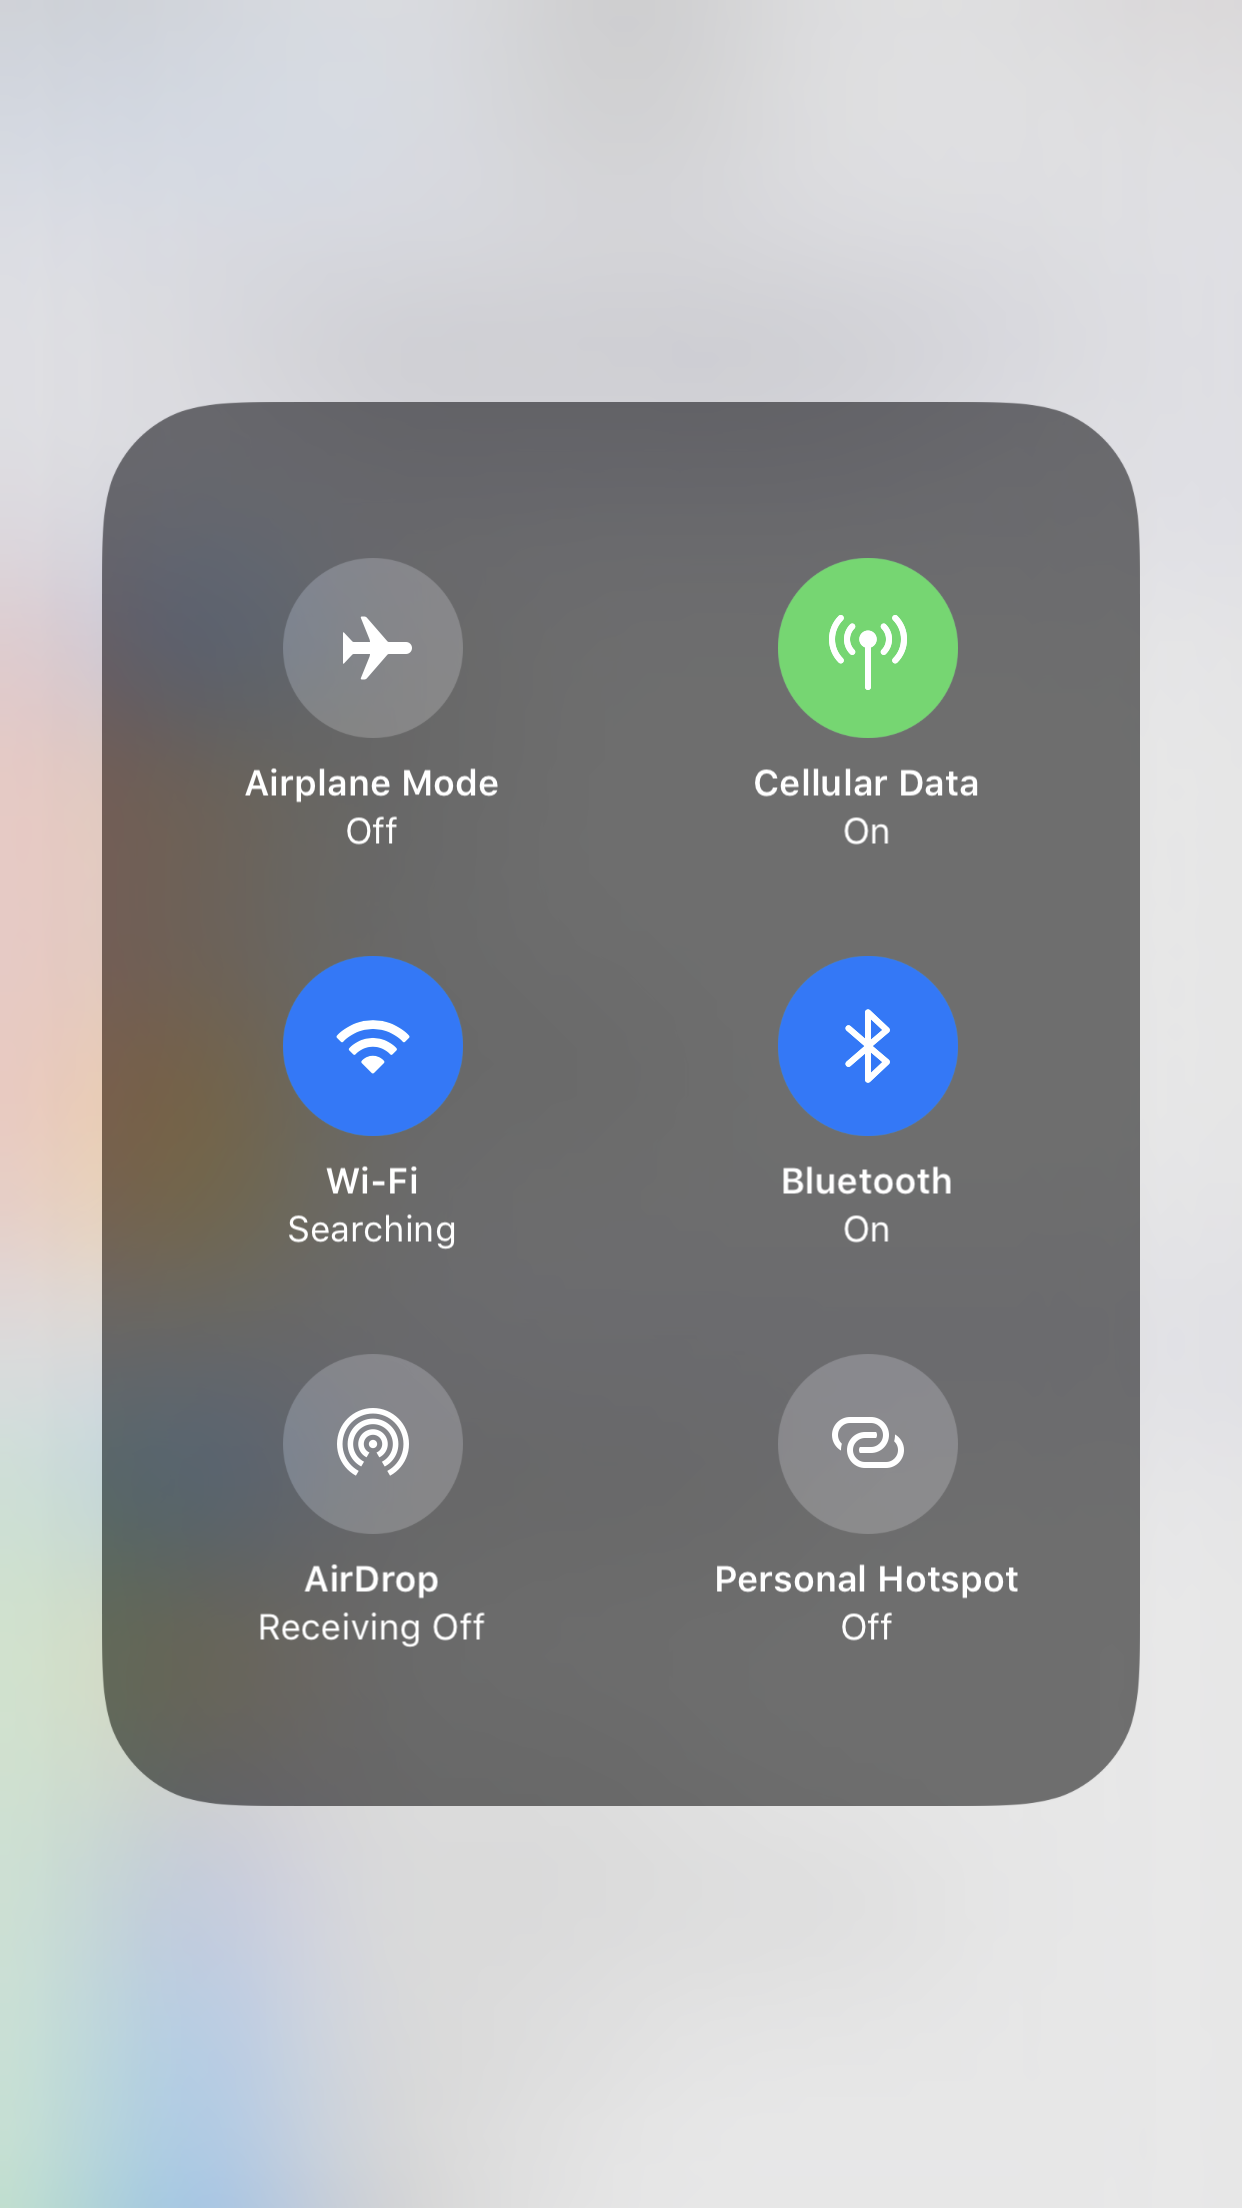 How to Customize Control Center in iOS 11 [Video]